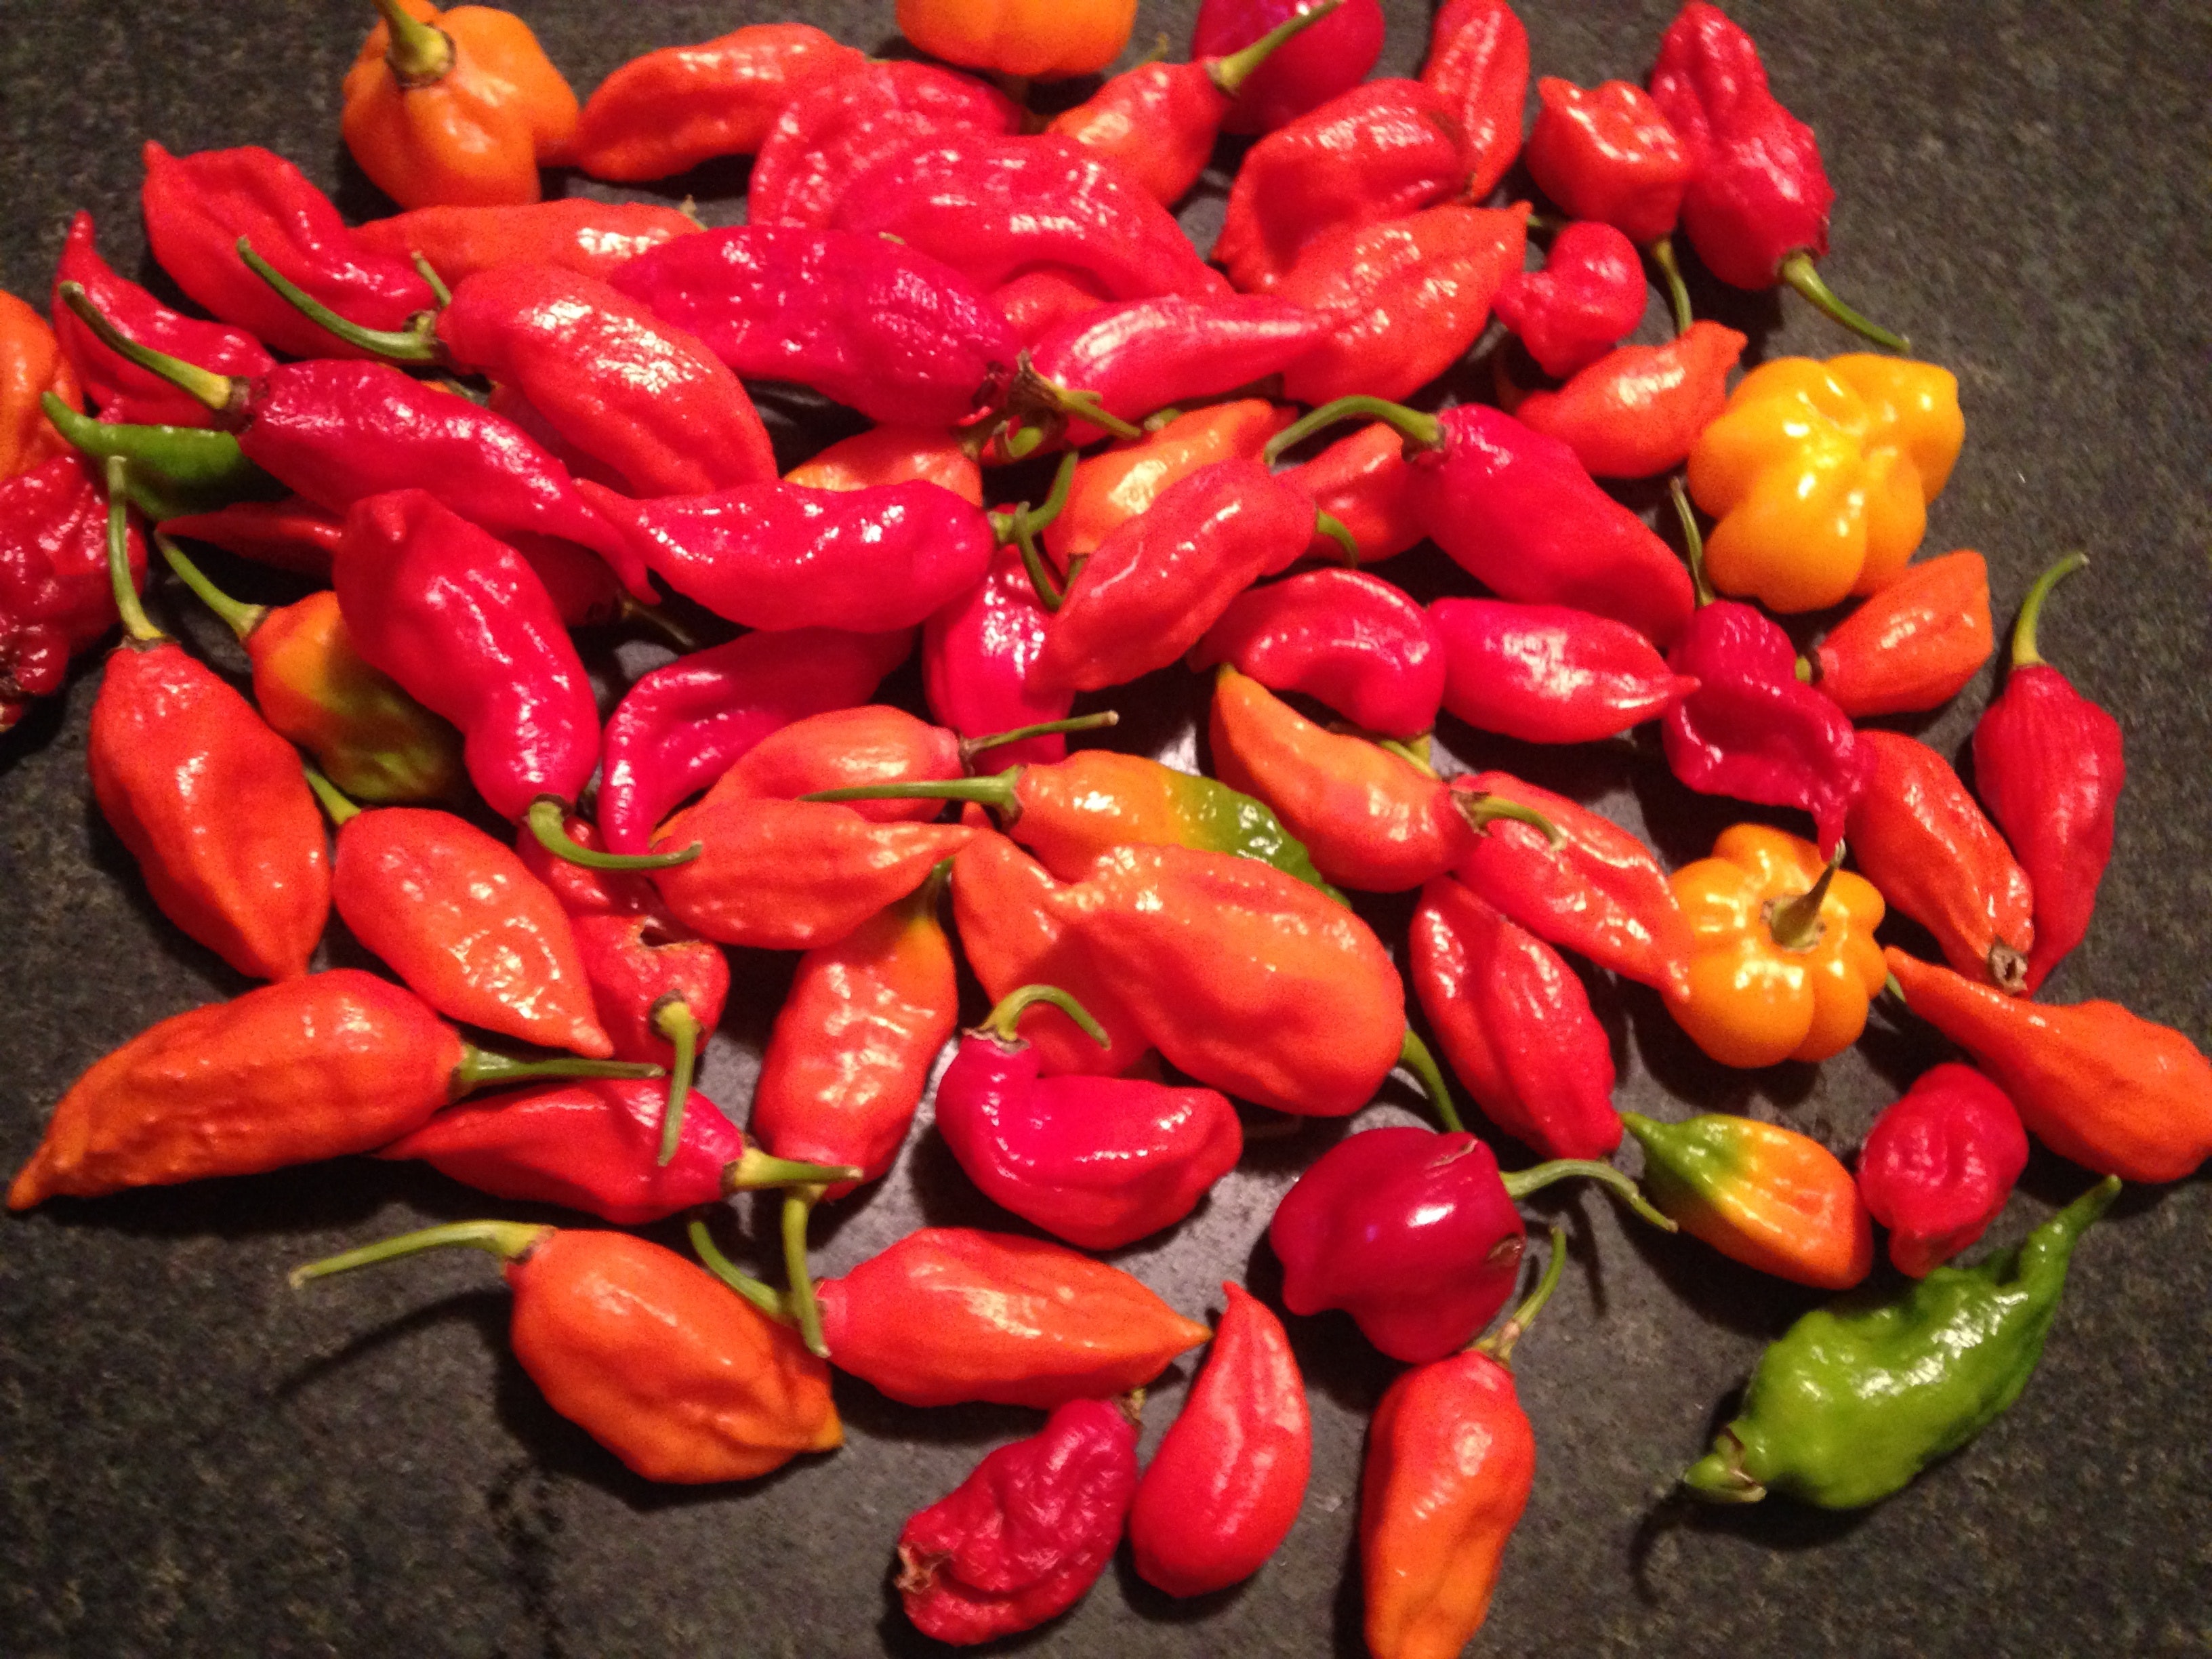 Free stock photo of Ghost peppers.